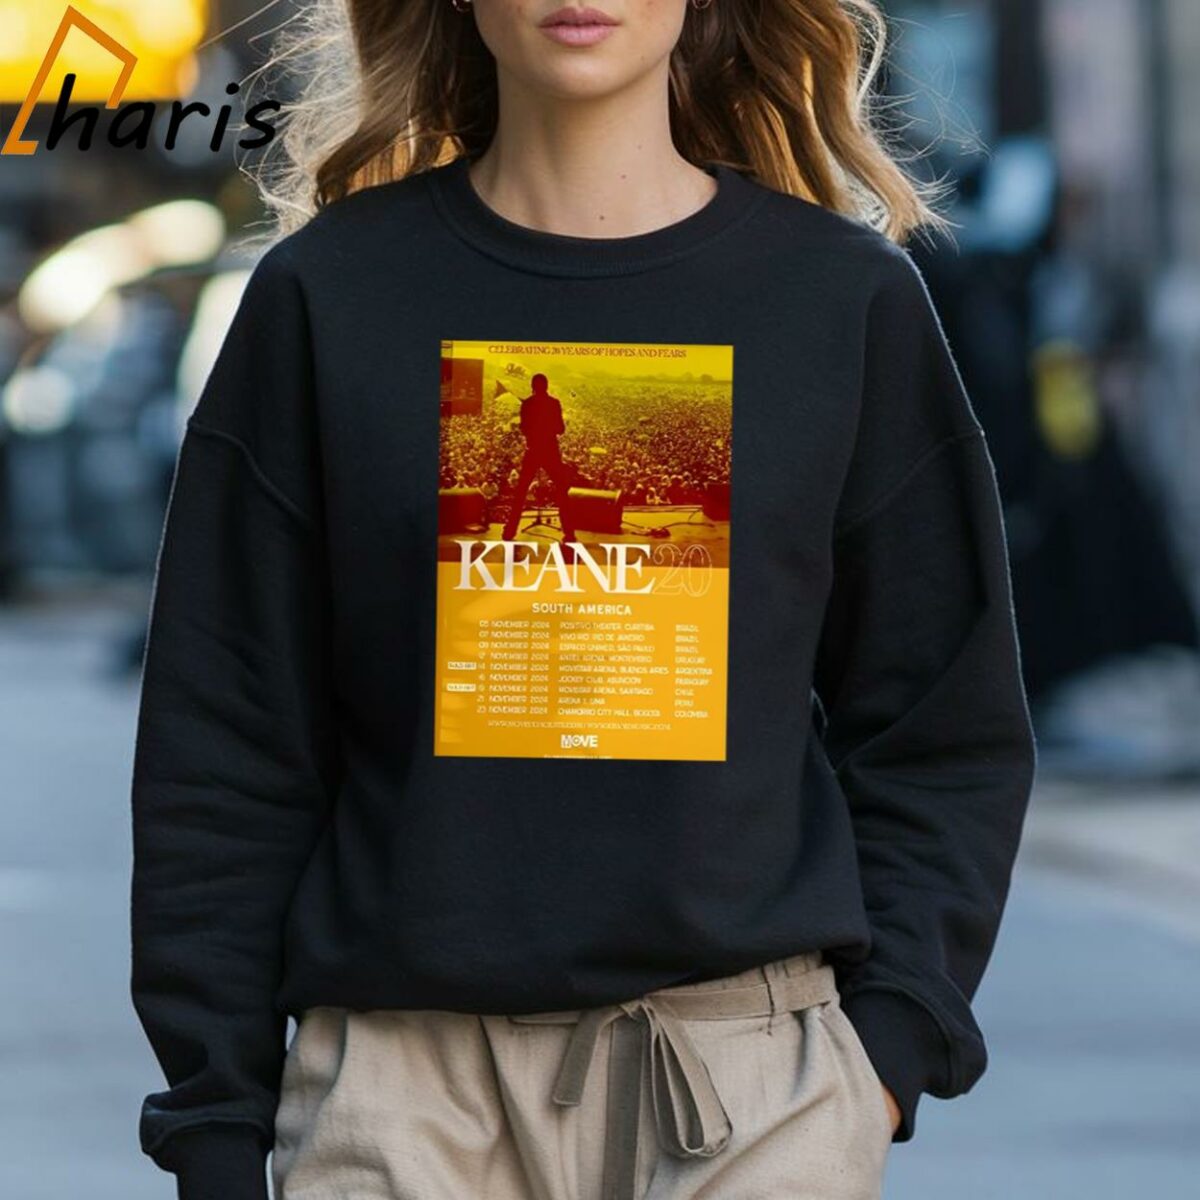 Keane 20 Years Of Hopes And Fears Tour Date South America T shirt 3 Sweatshirt